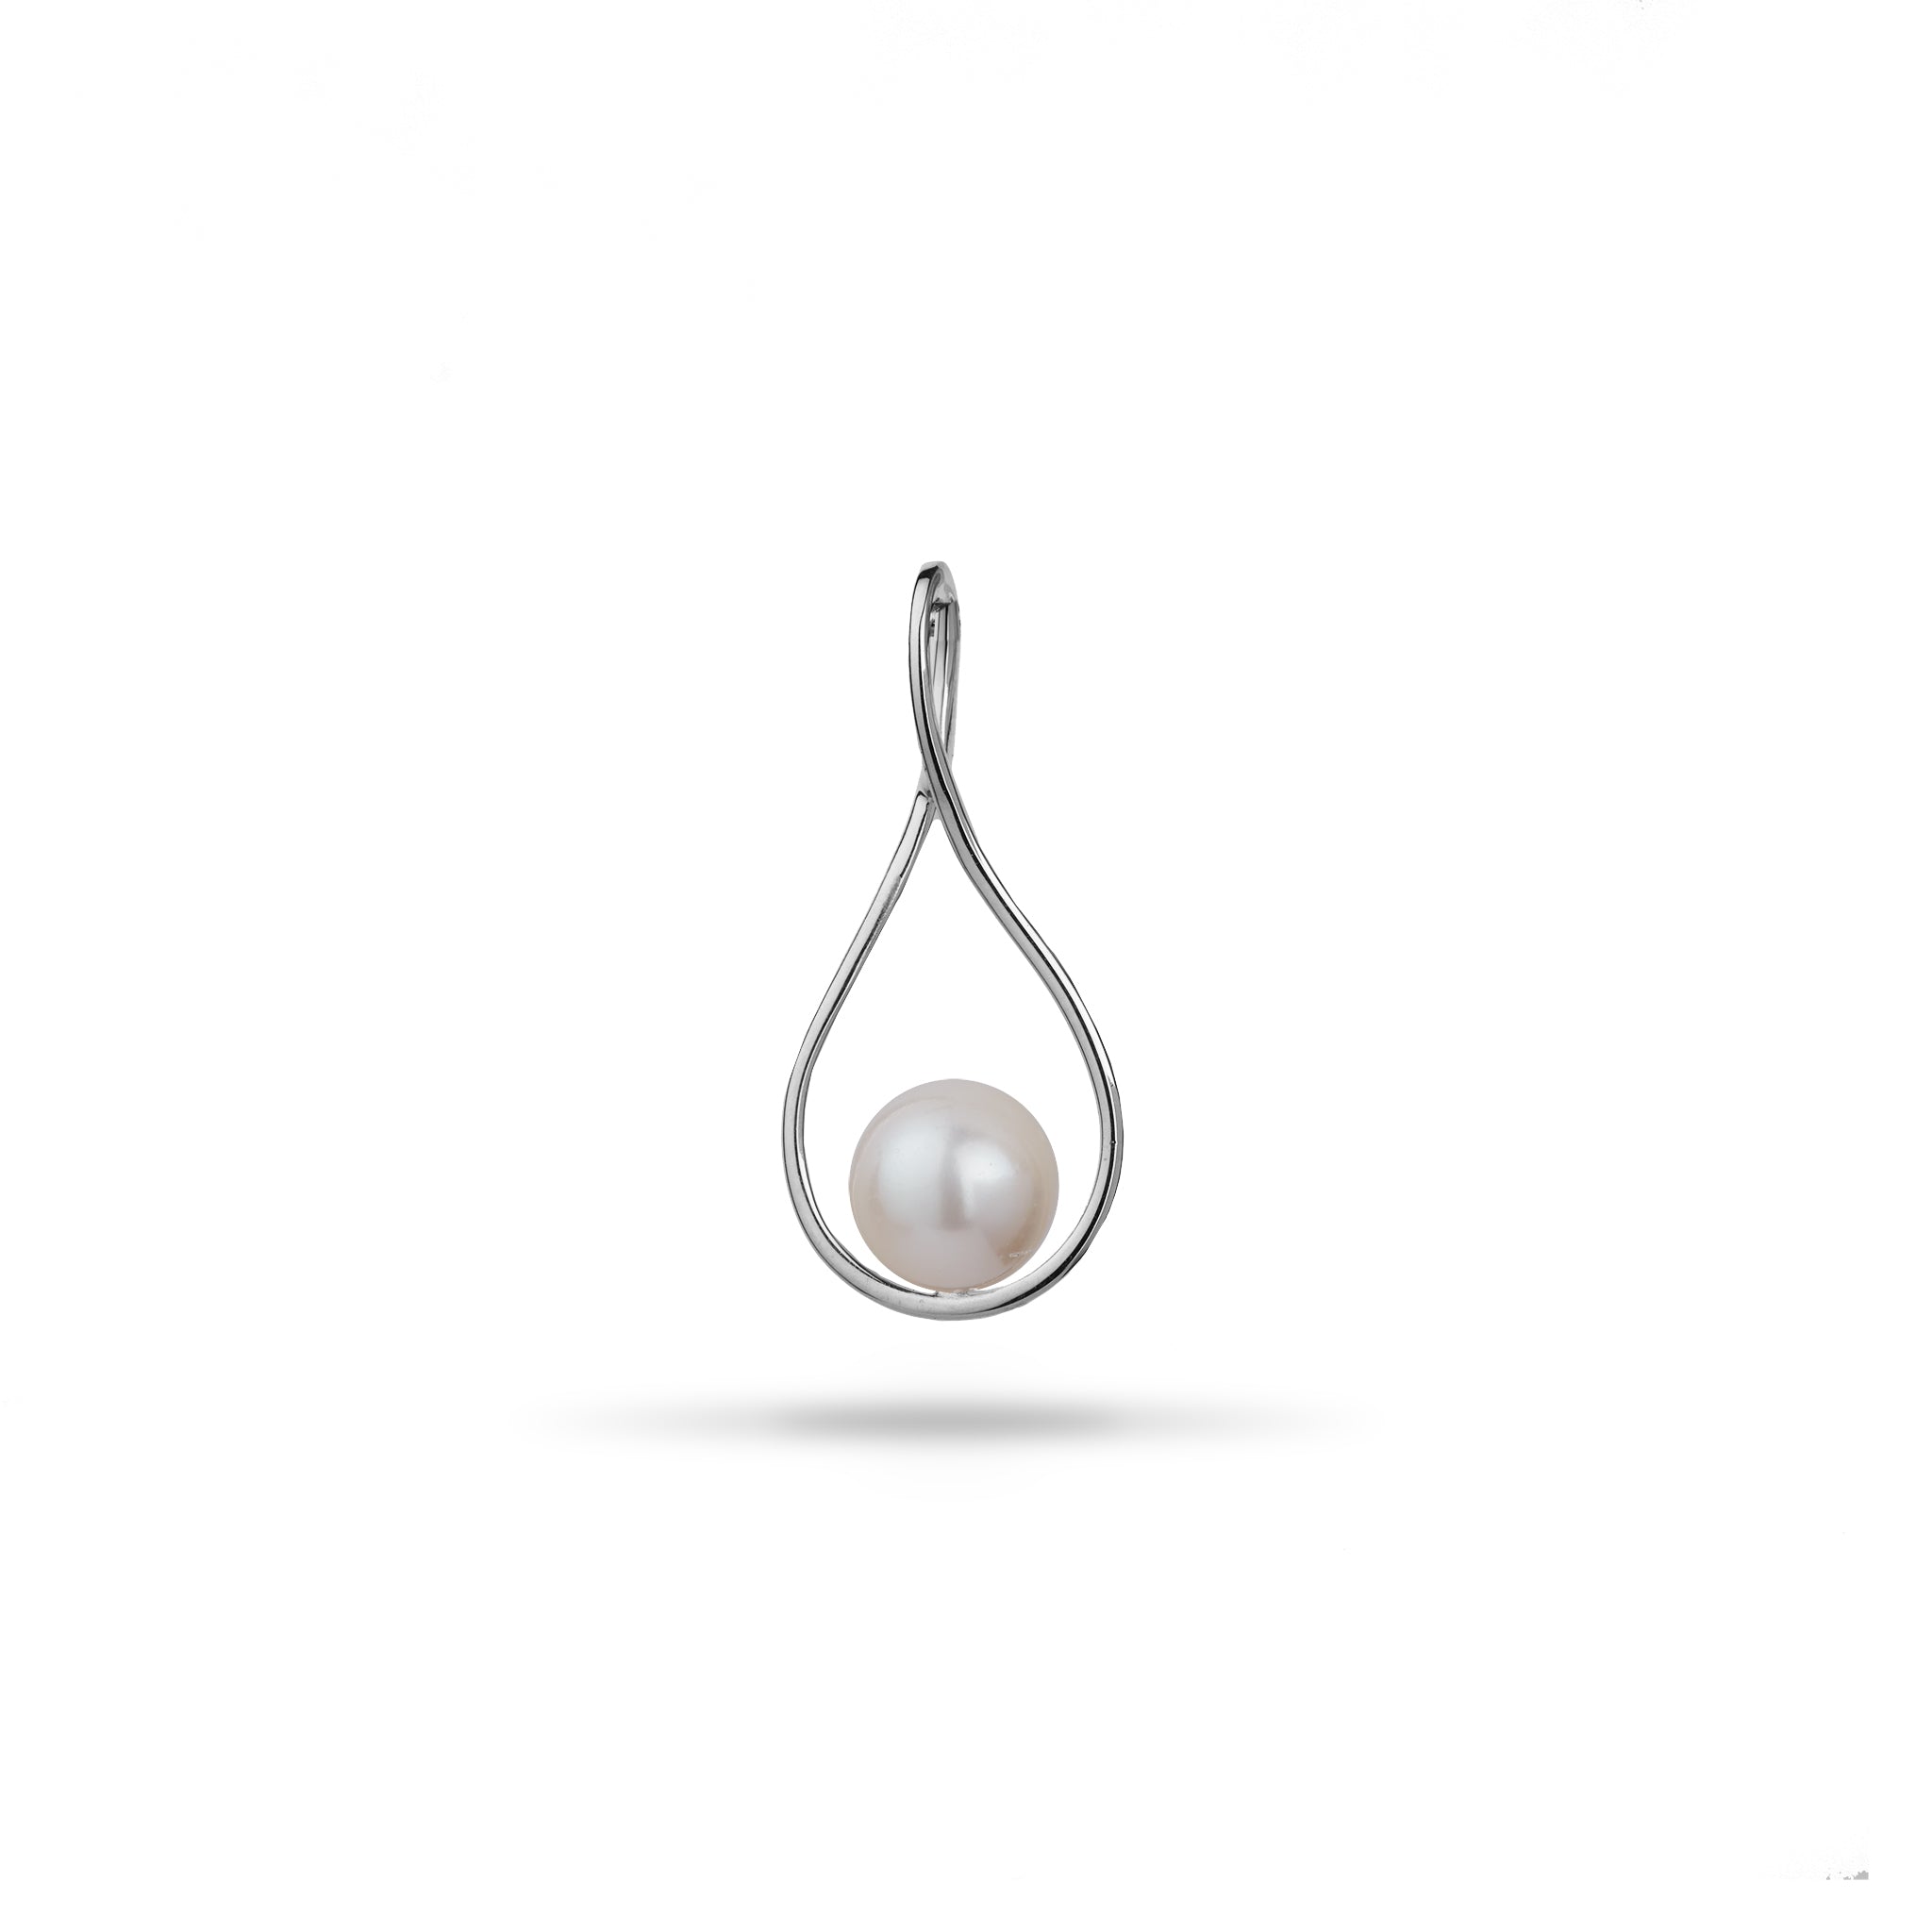 Pick A Pearl Pendant in White Gold with White Pearl - Maui Divers Jewelry